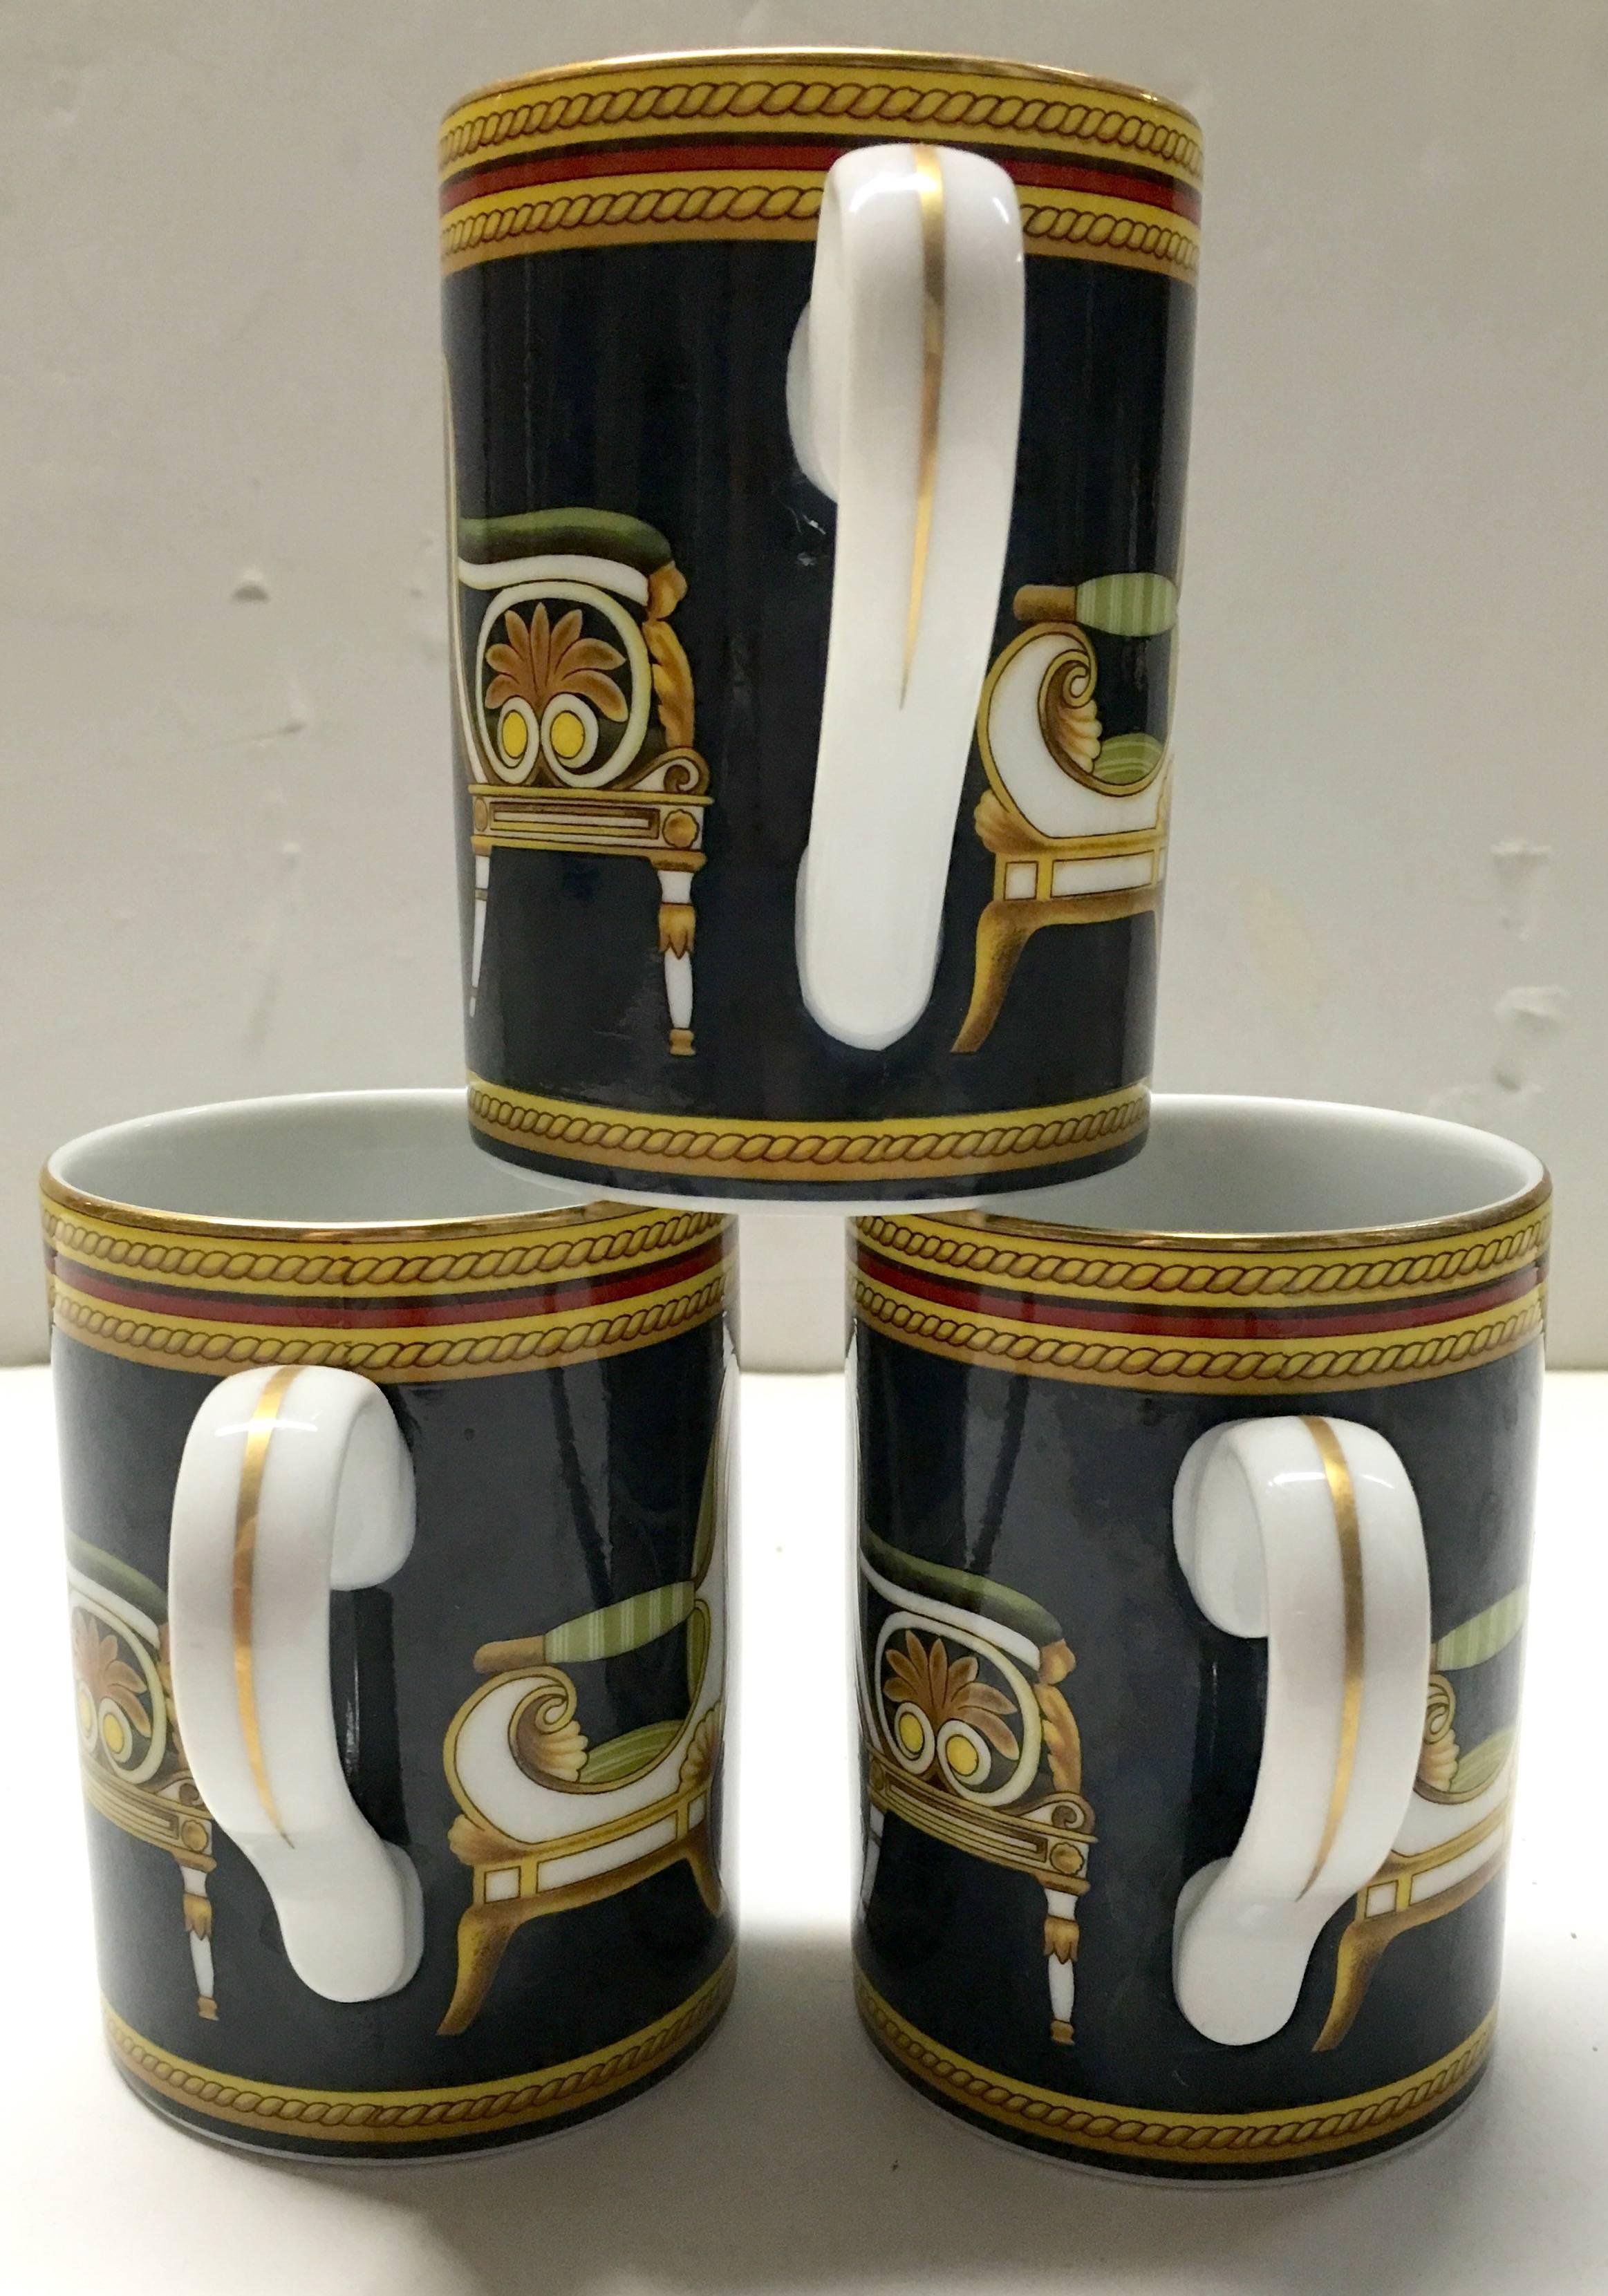 1980s Gucci porcelain handle mugs in navy blue with Italian chair motif. Signed on underside, GUCCI Porcellana.